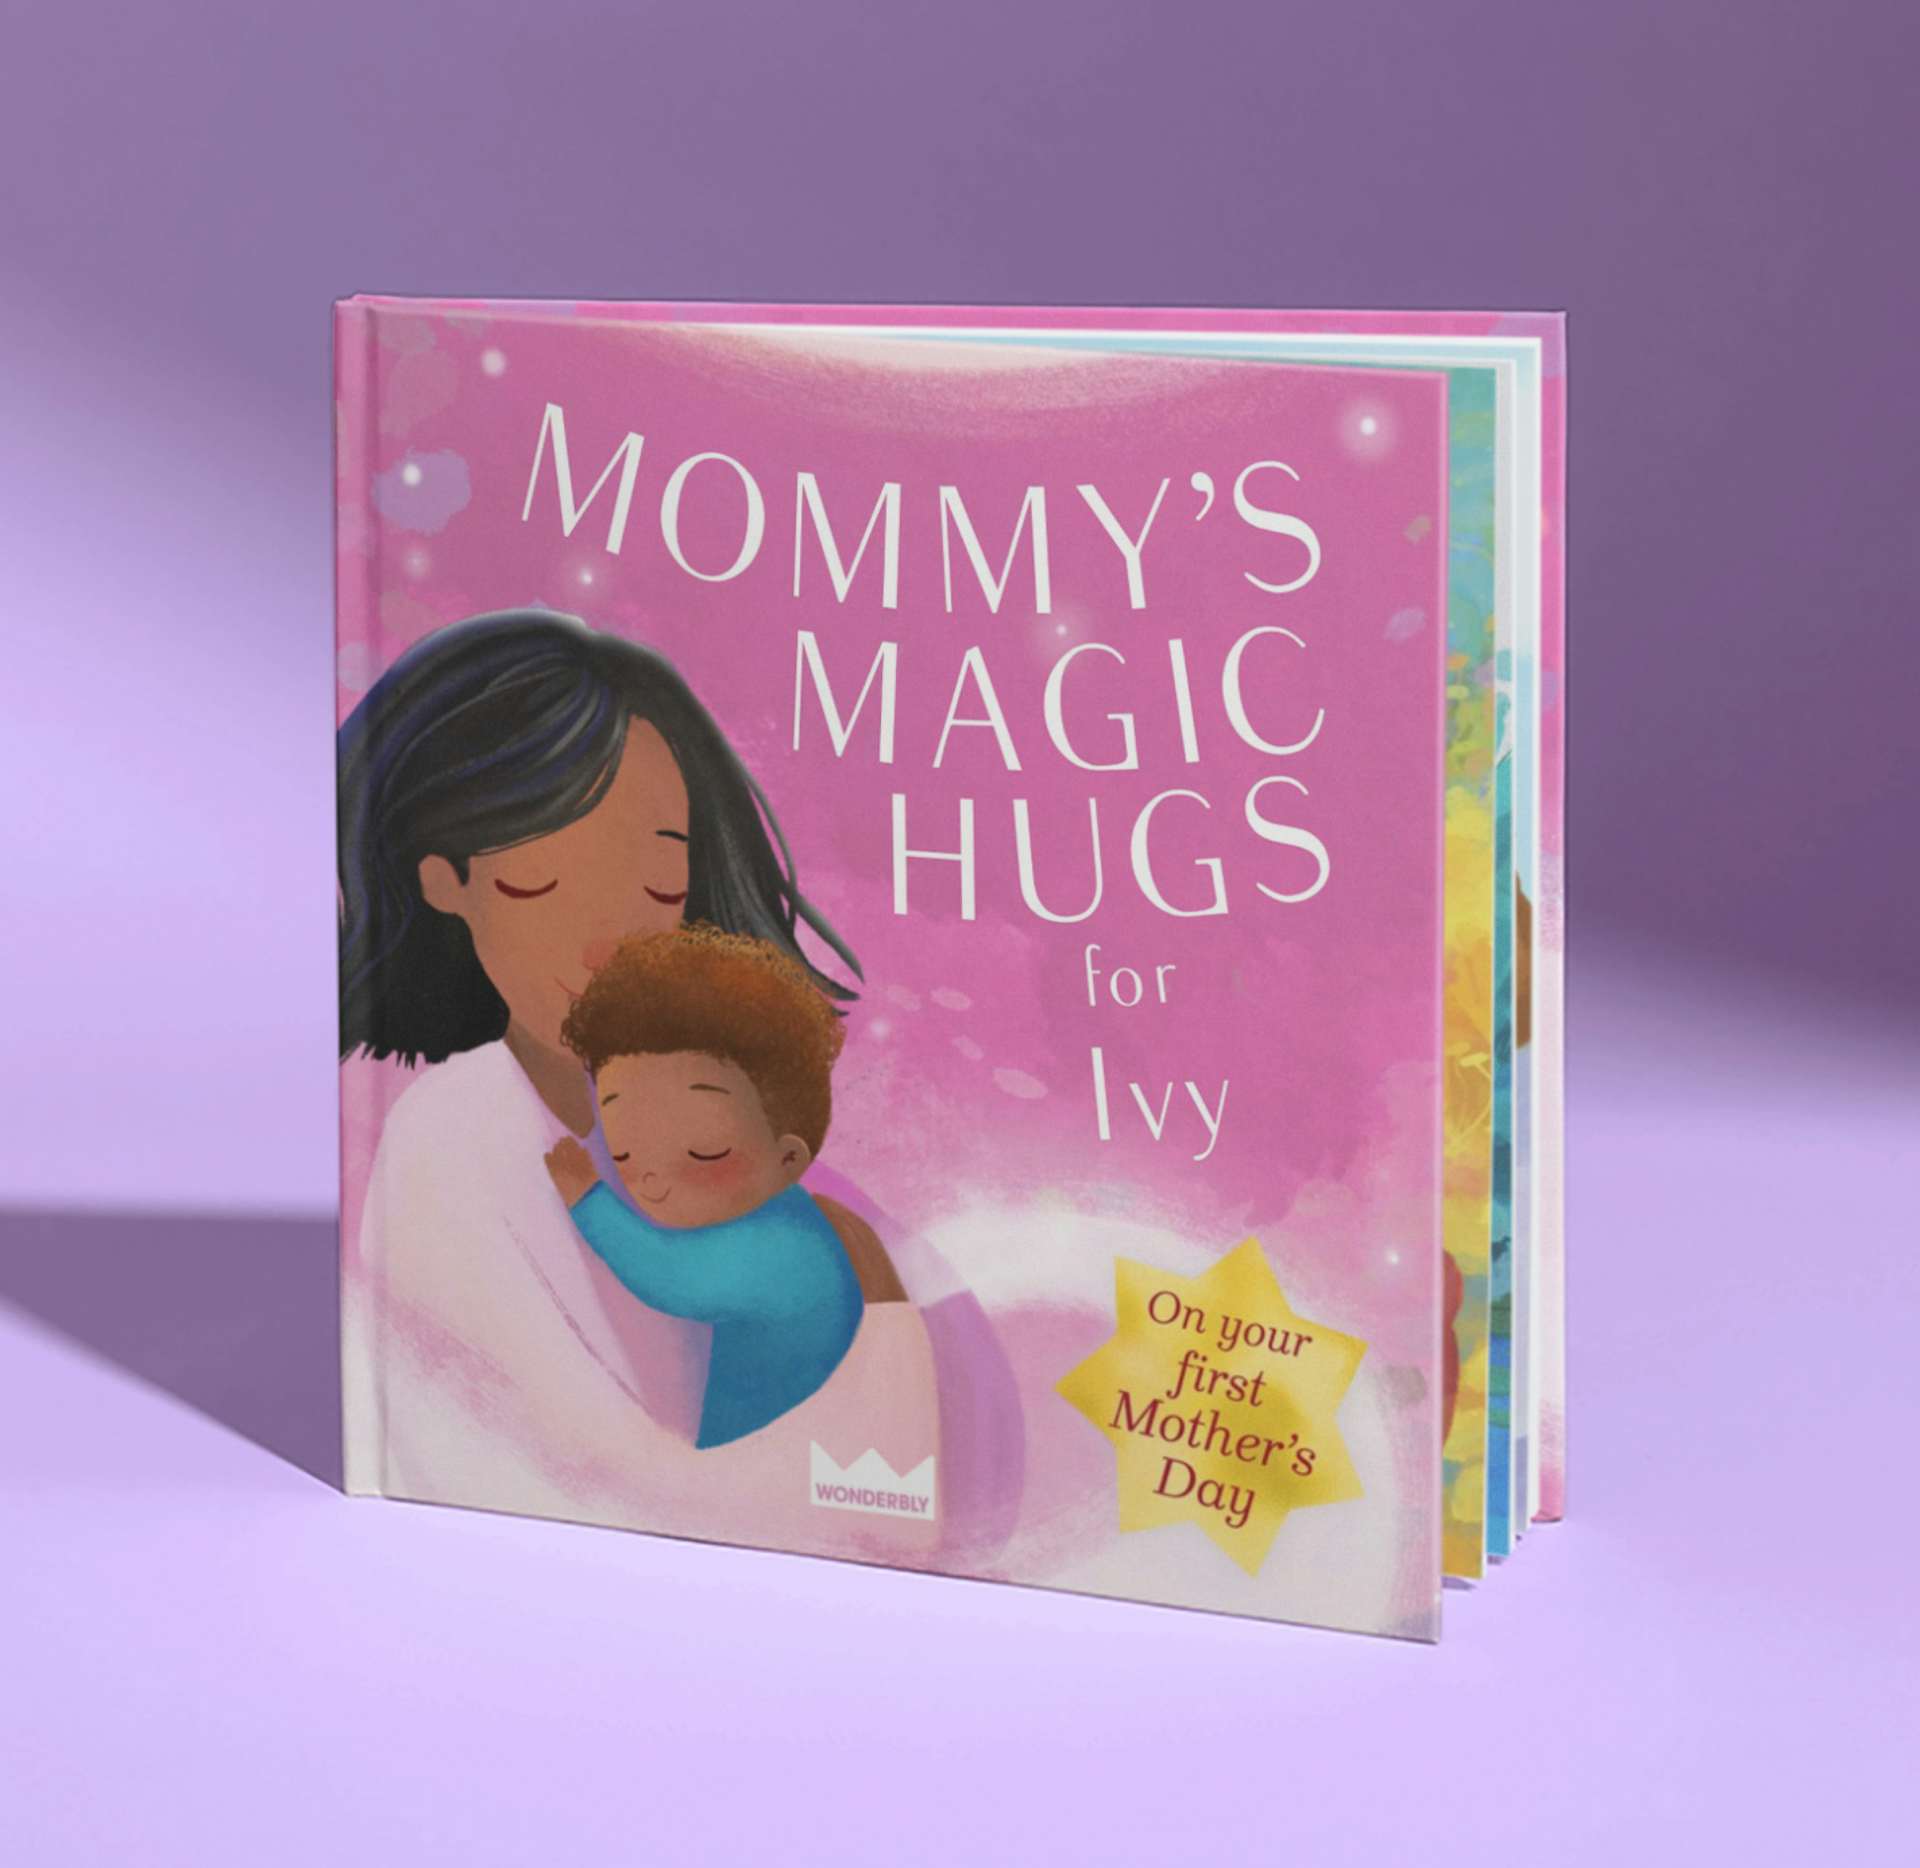 mommy's magic hugs pink cover with special 'first mother's day' badge